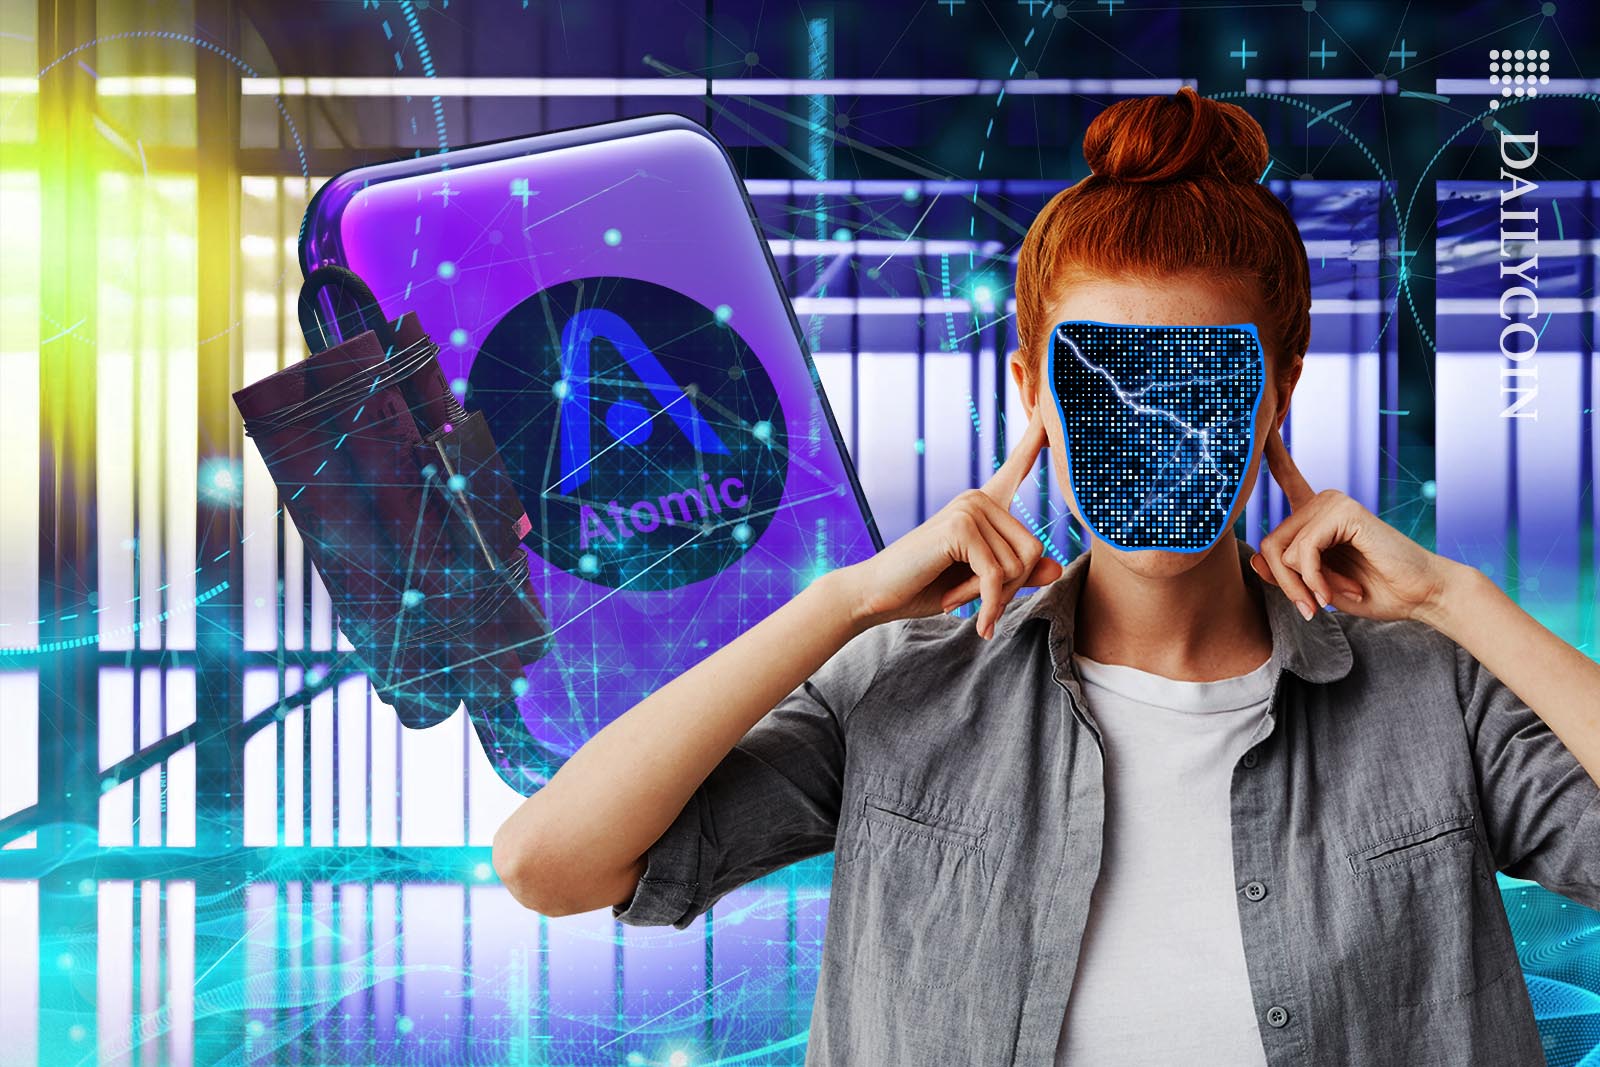 Woman with a digital void for a face, waiting for a bomb to explode on an Atomic Wallet. She has her fingers in her ears in anticipation of the explosion.